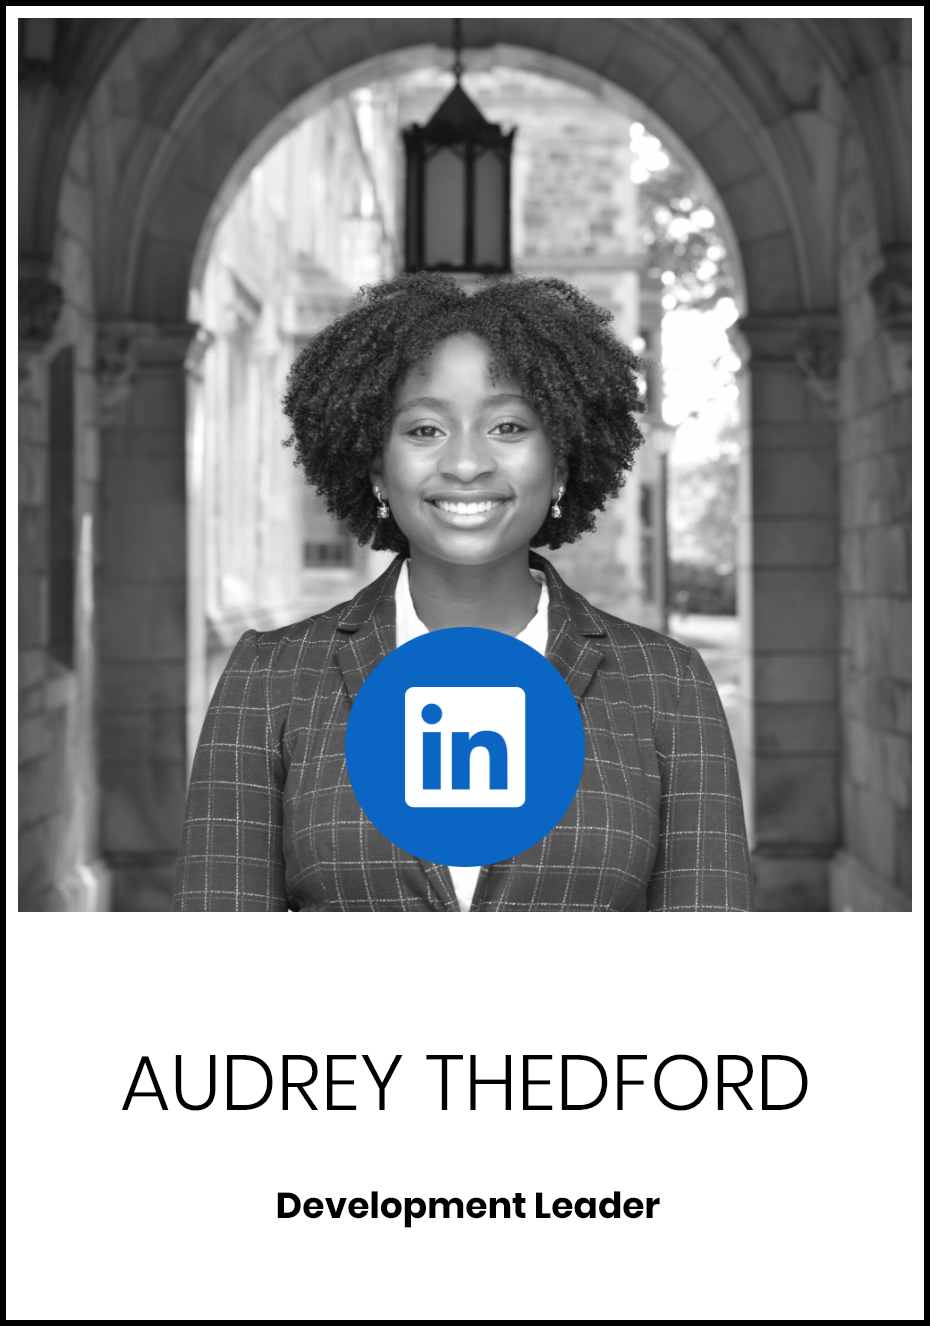 Audrey Thedford